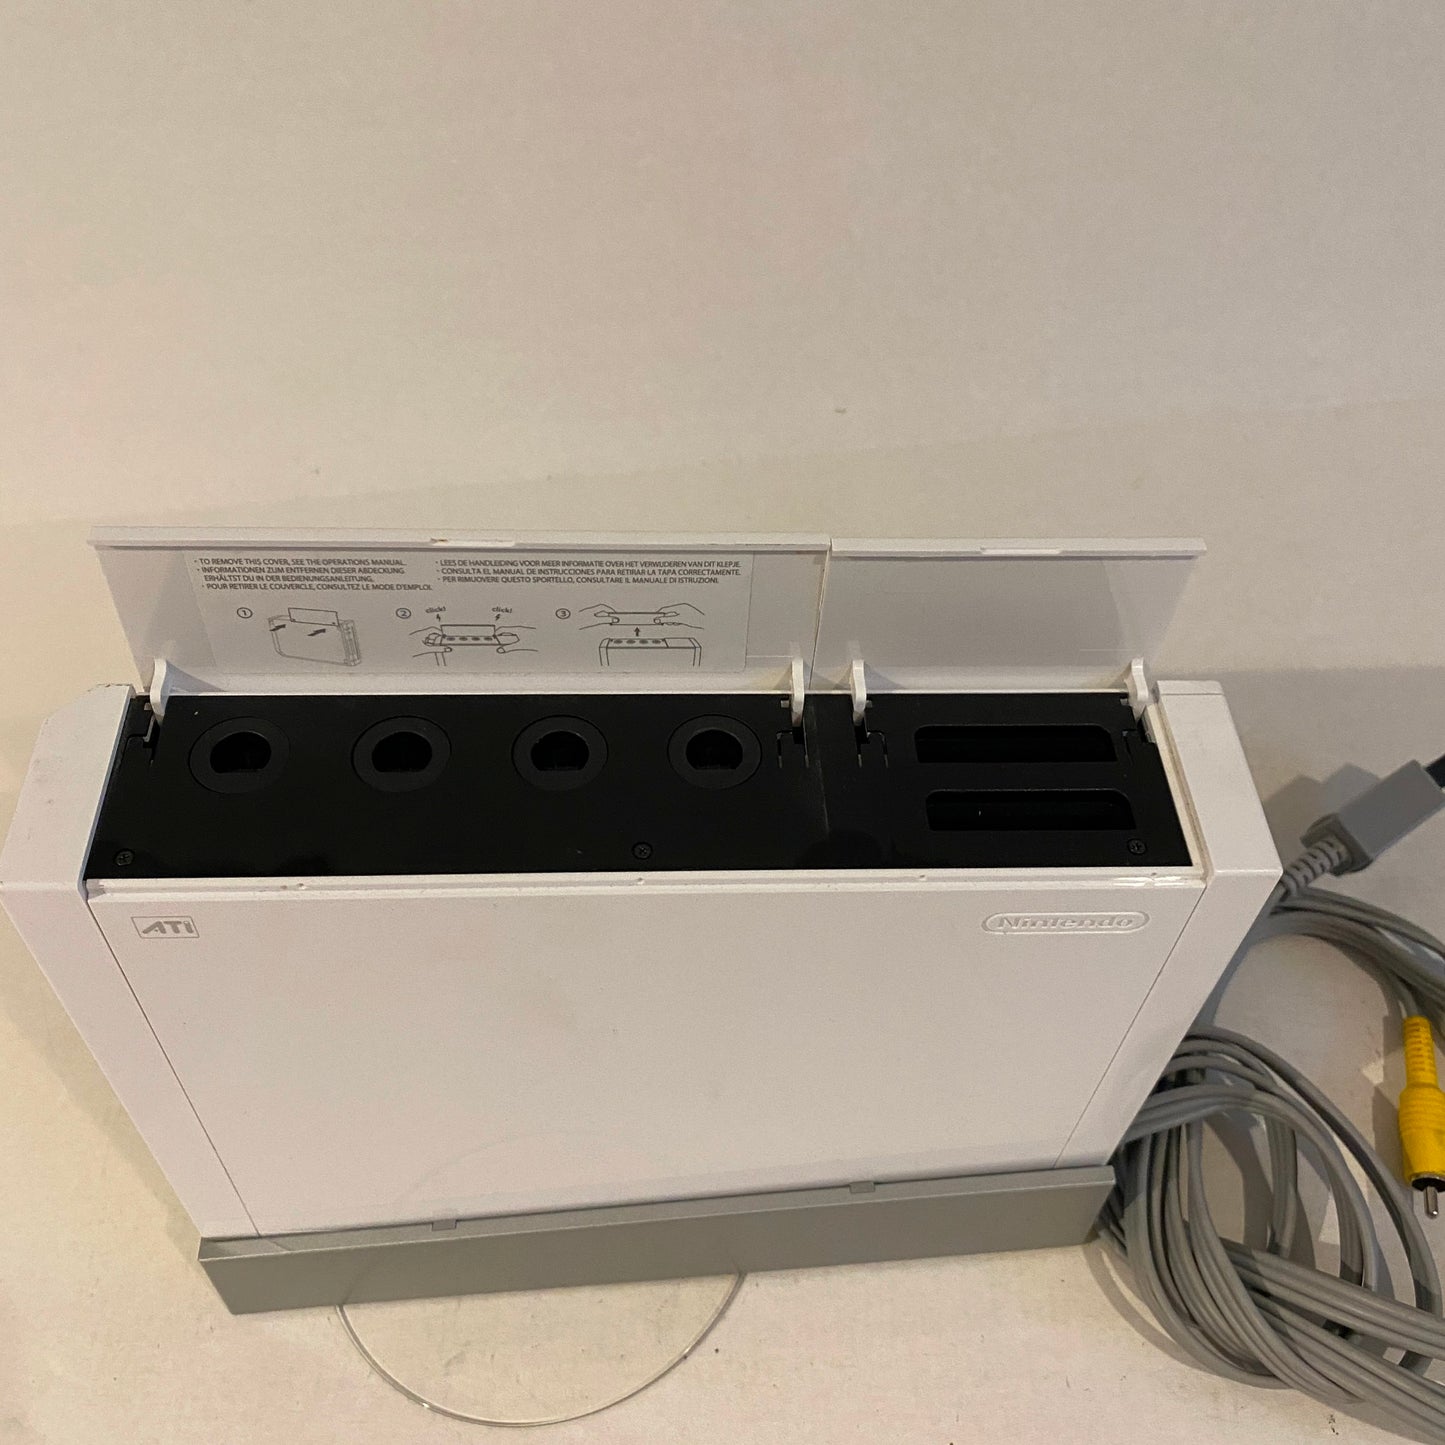 Nintendo Wii Console and A/V Cable -  RVL-001